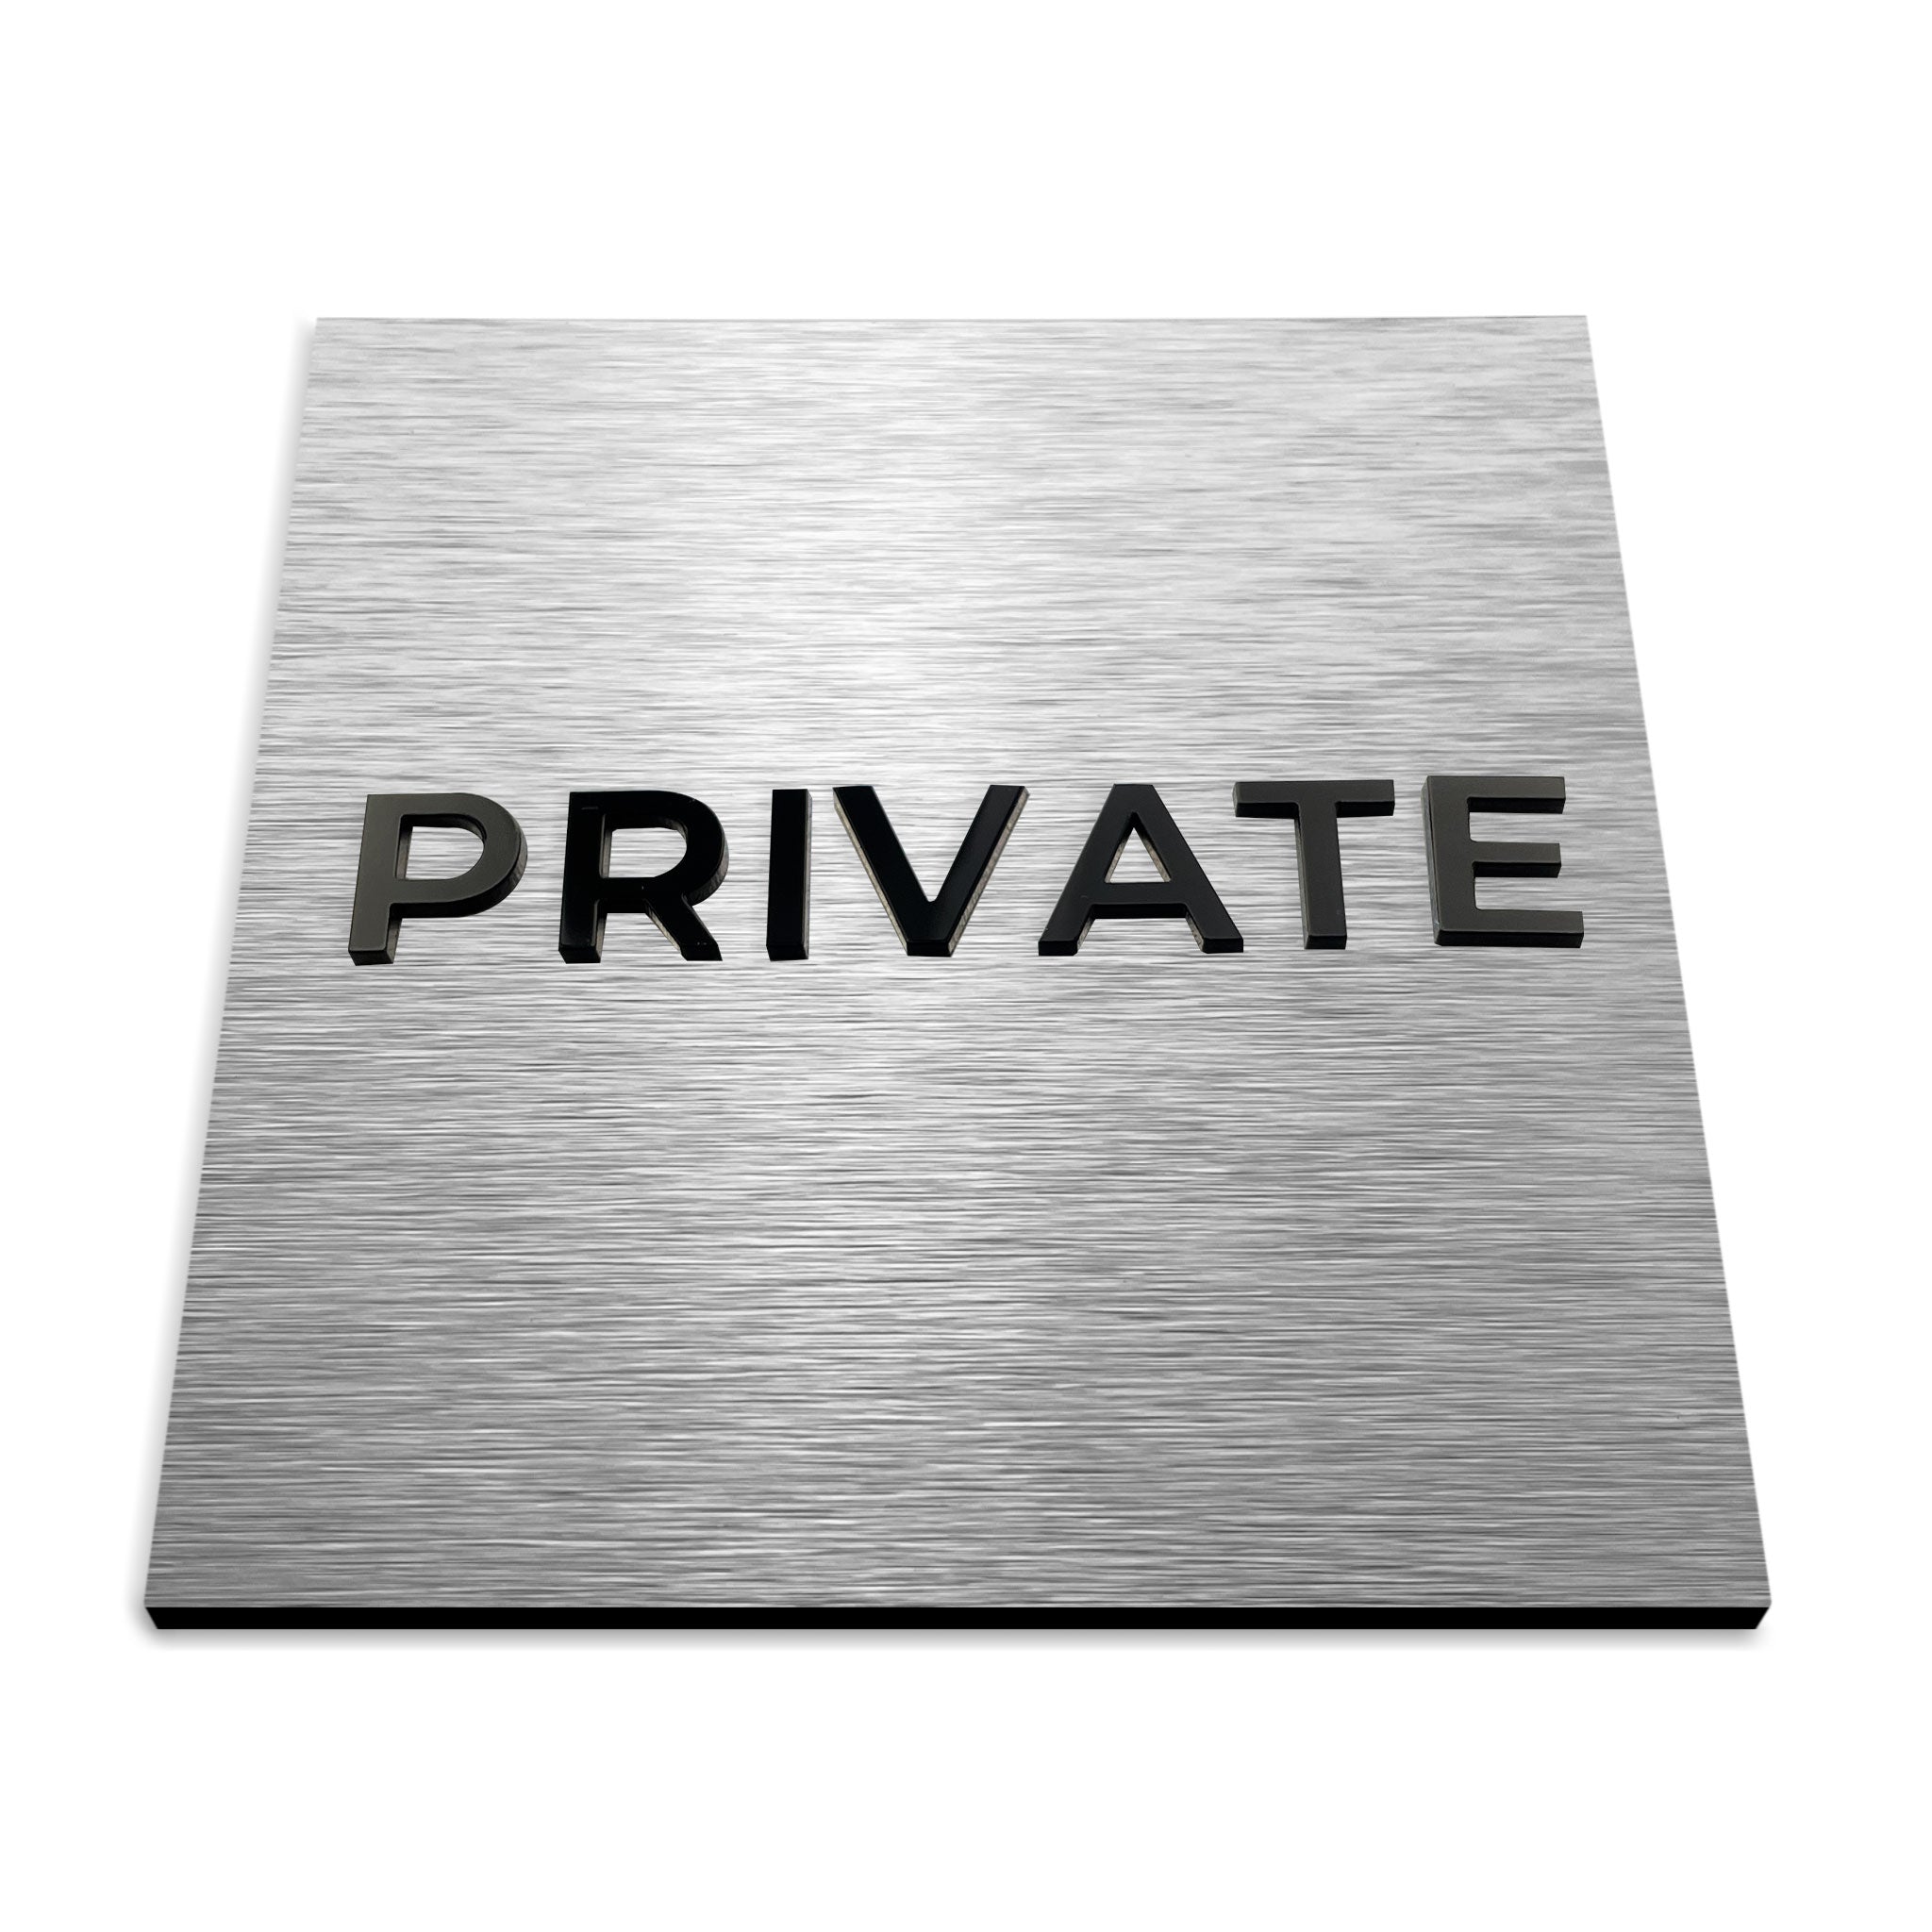 PRIVATE ROOM SIGNAGE - ALUMADESIGNCO Door Signs - Custom Door Signs For Business & Office